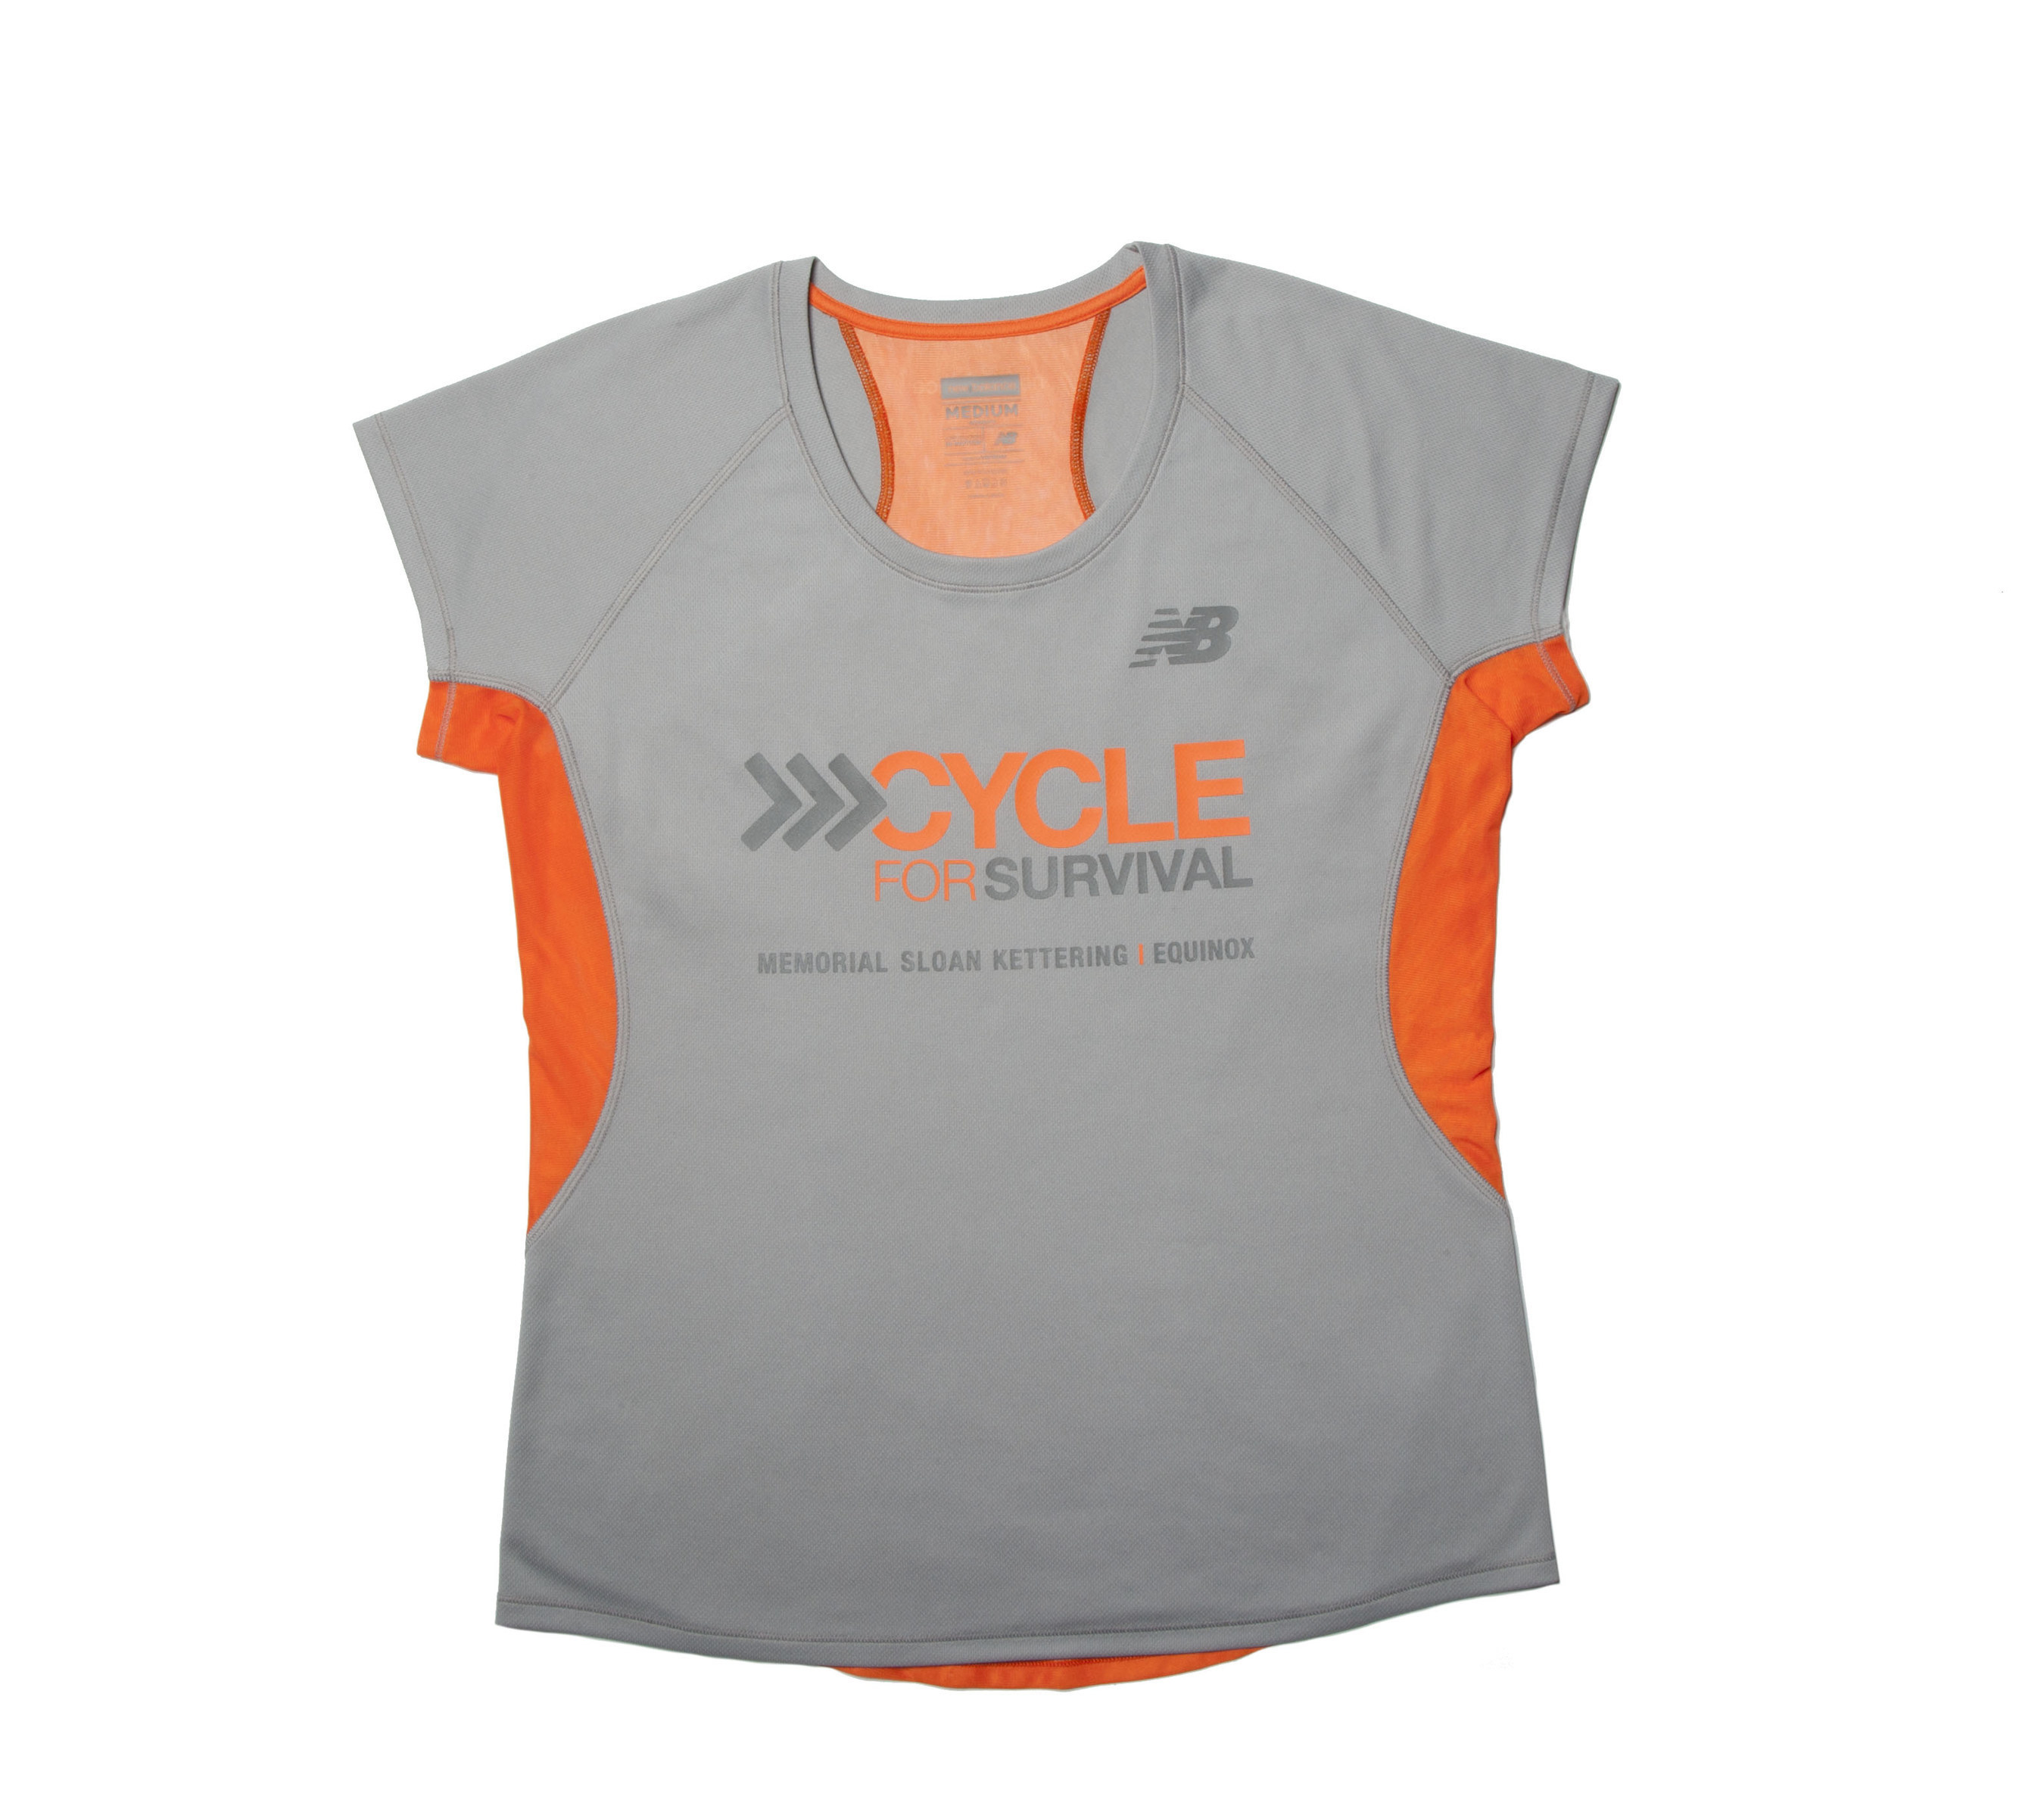 New Balance Performance Tee for Cycle for Survival's 2015 events